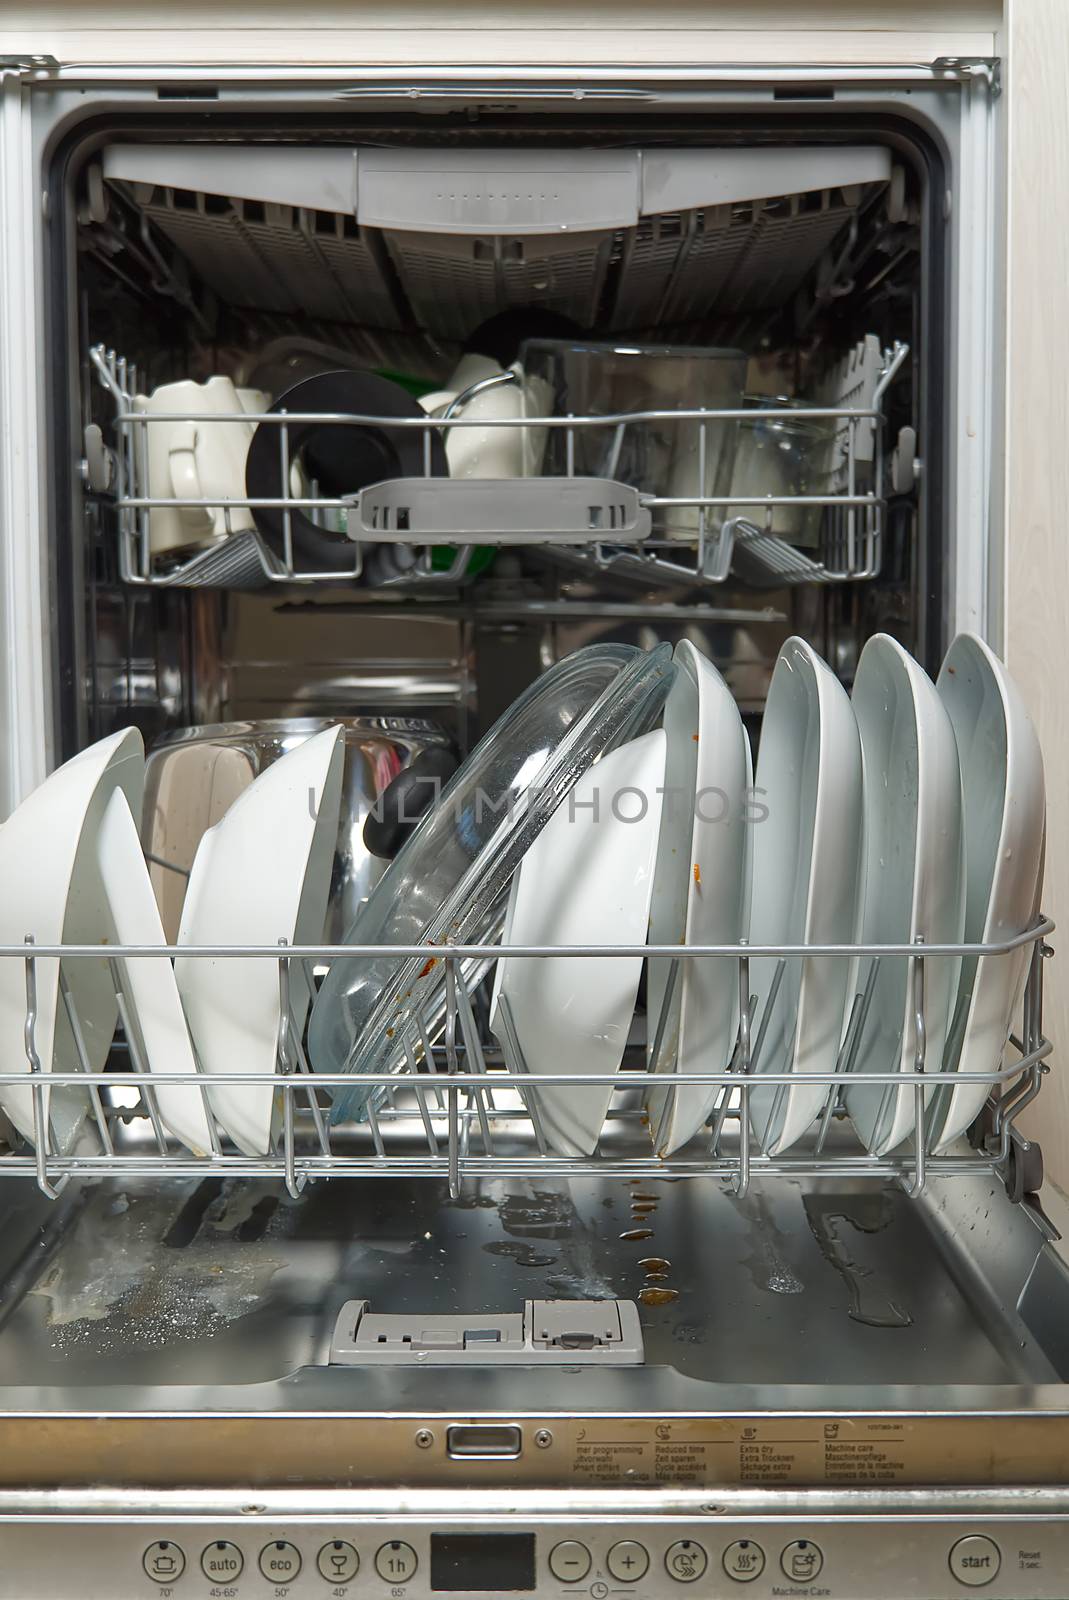 Dirty dish in open integrated dishwasher. Open dishwasher with dirty dishes inside before washing. full loaded dishwasher ready for washing. by PhotoTime